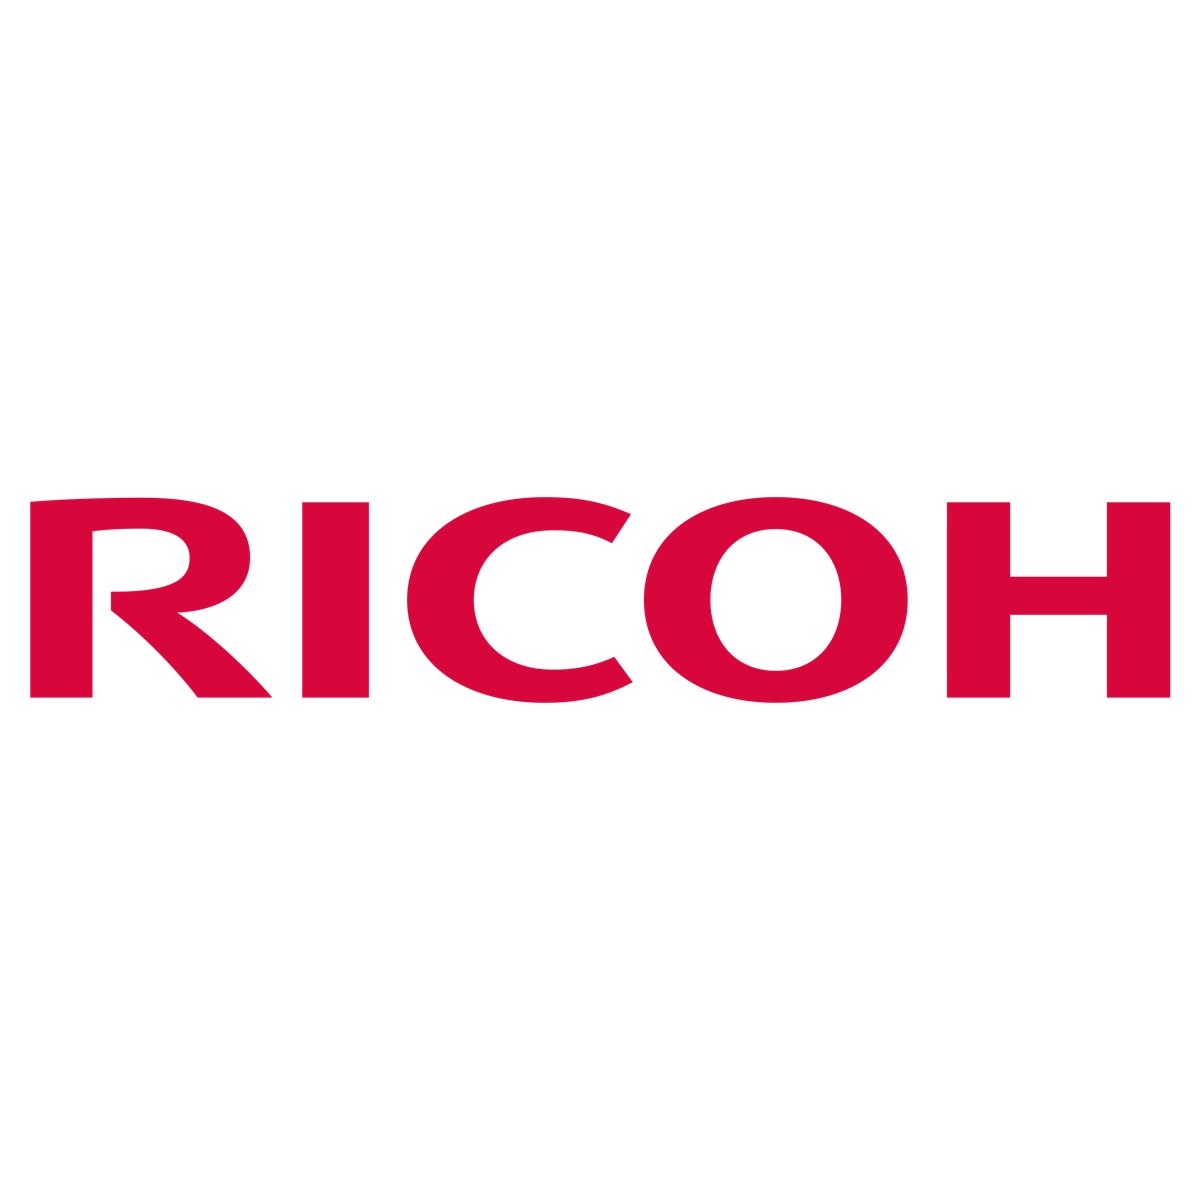 Ricoh IM C3500A - Multifunktionsdrucker - Farbe - Laser/Led - Colored